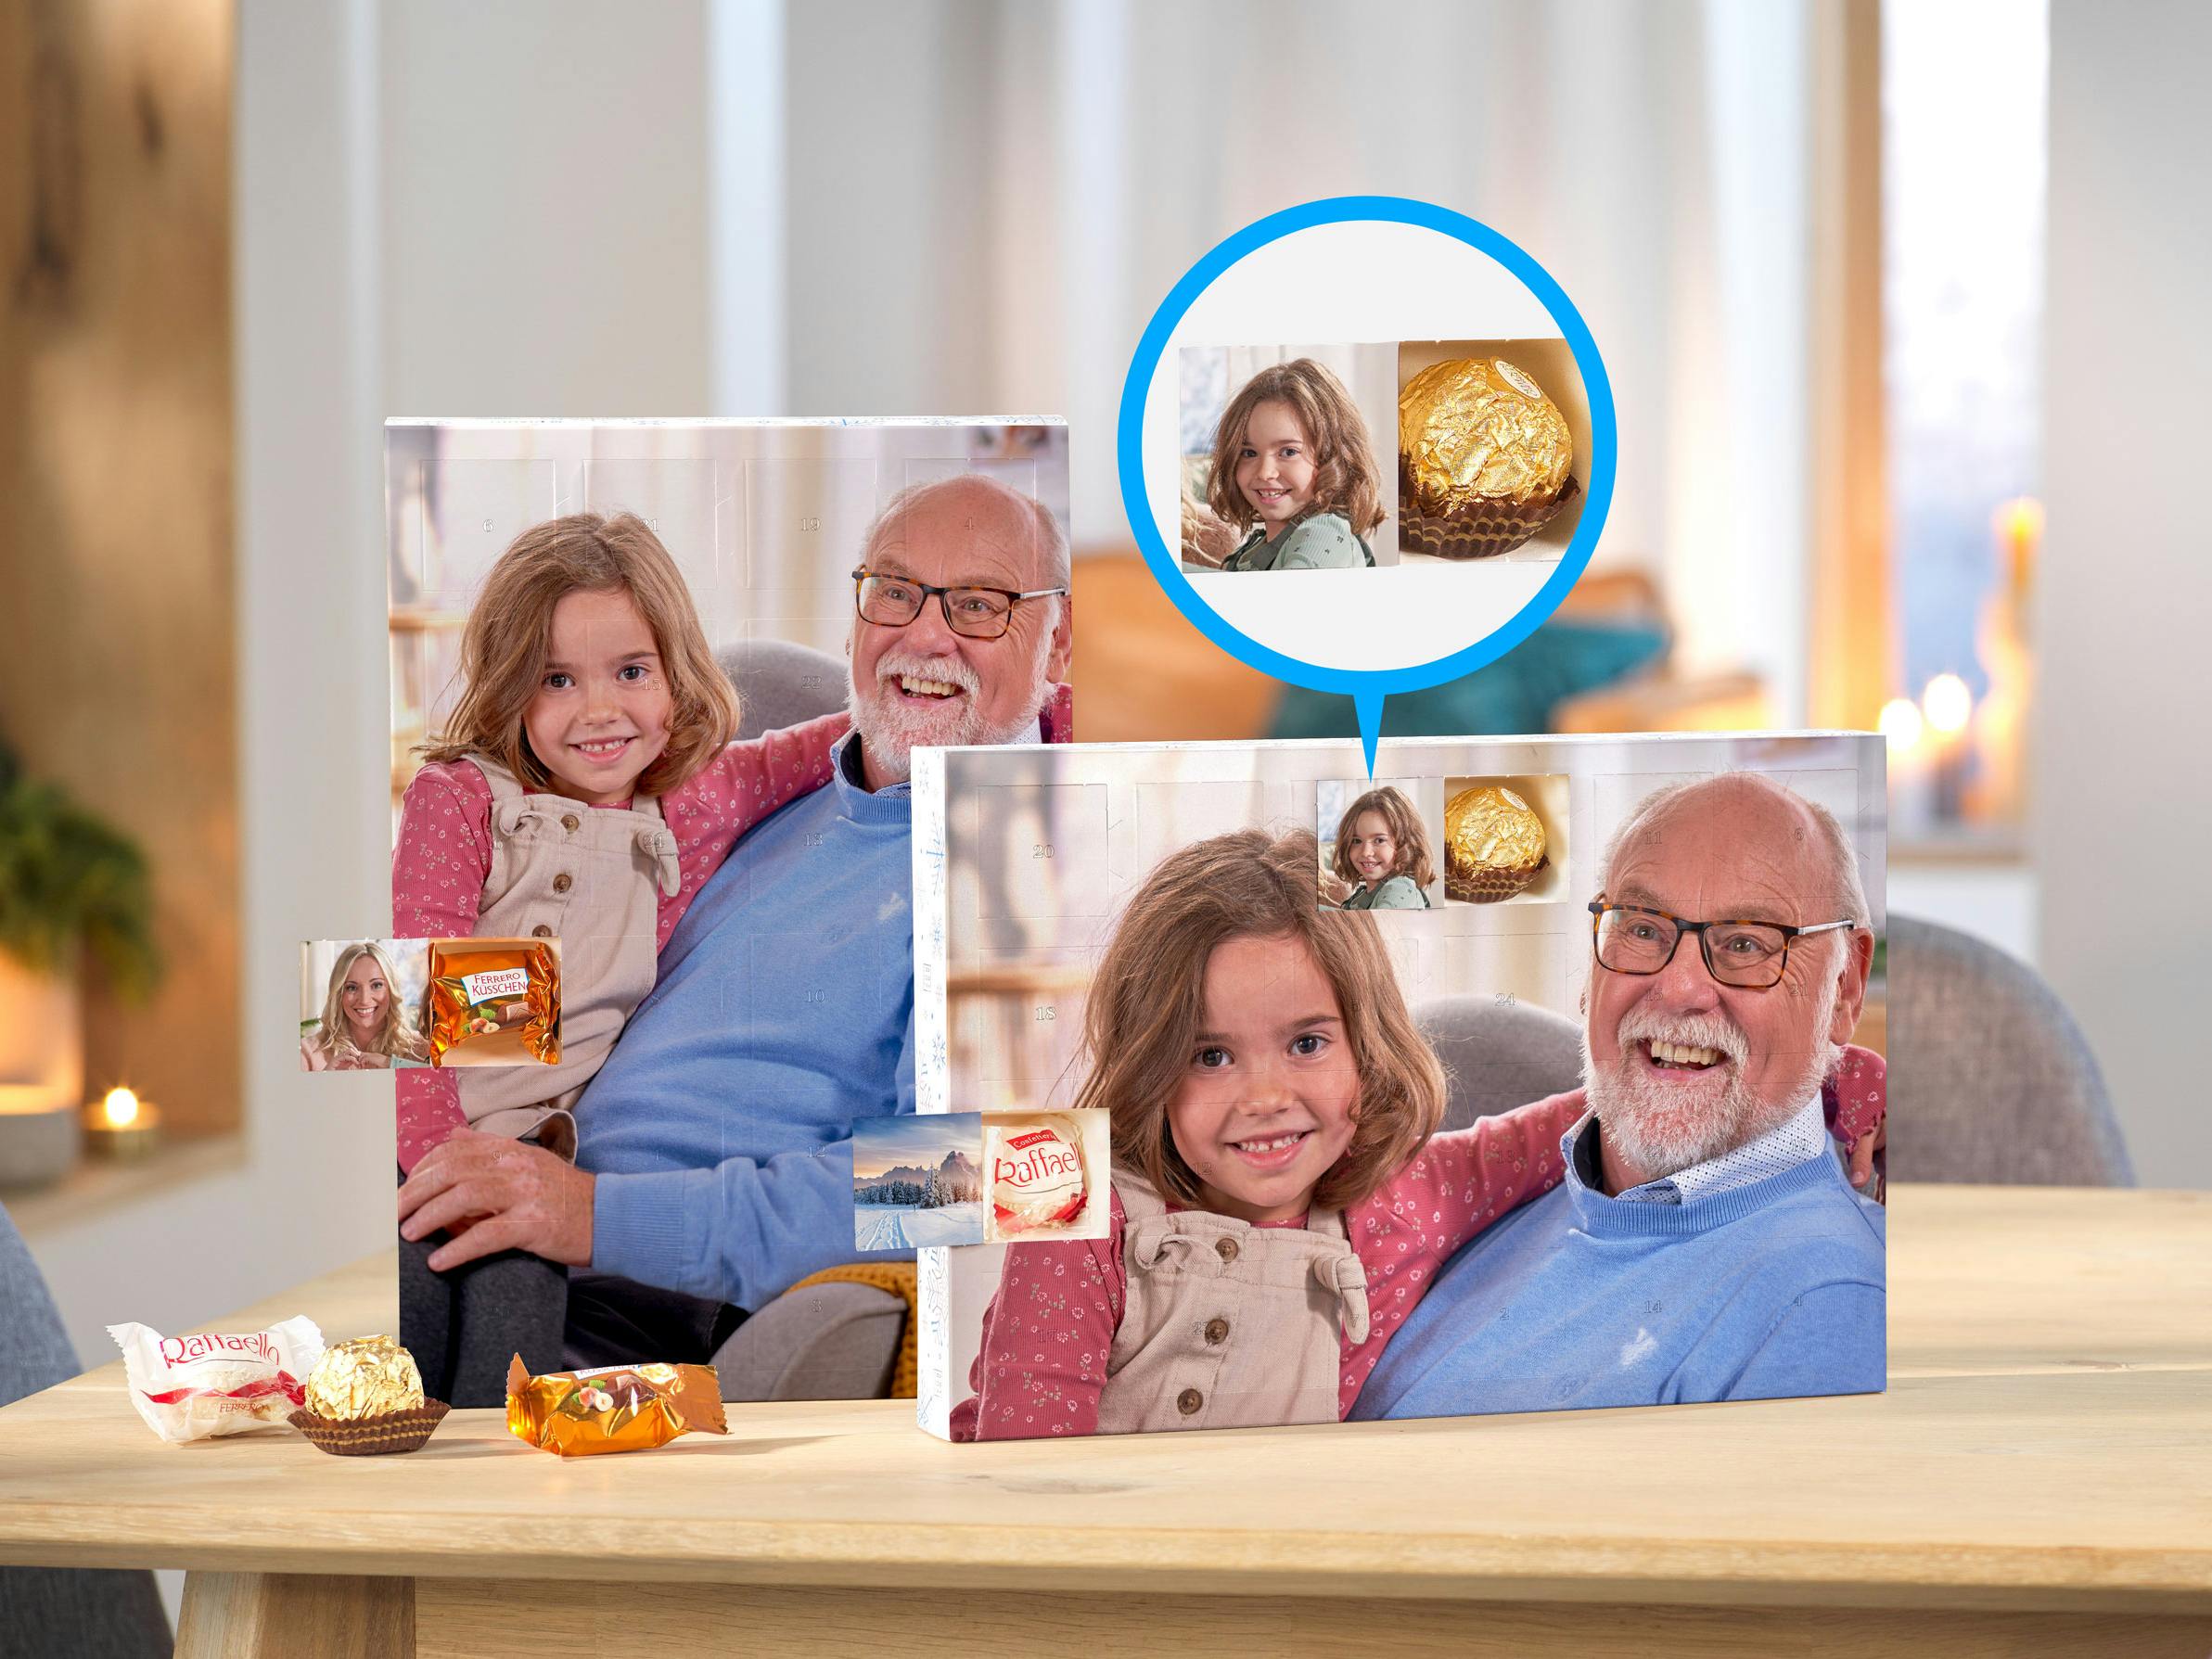 Photo Advent Calendar with Ferrero chocolates and an image of a grandfather with his granddaughter